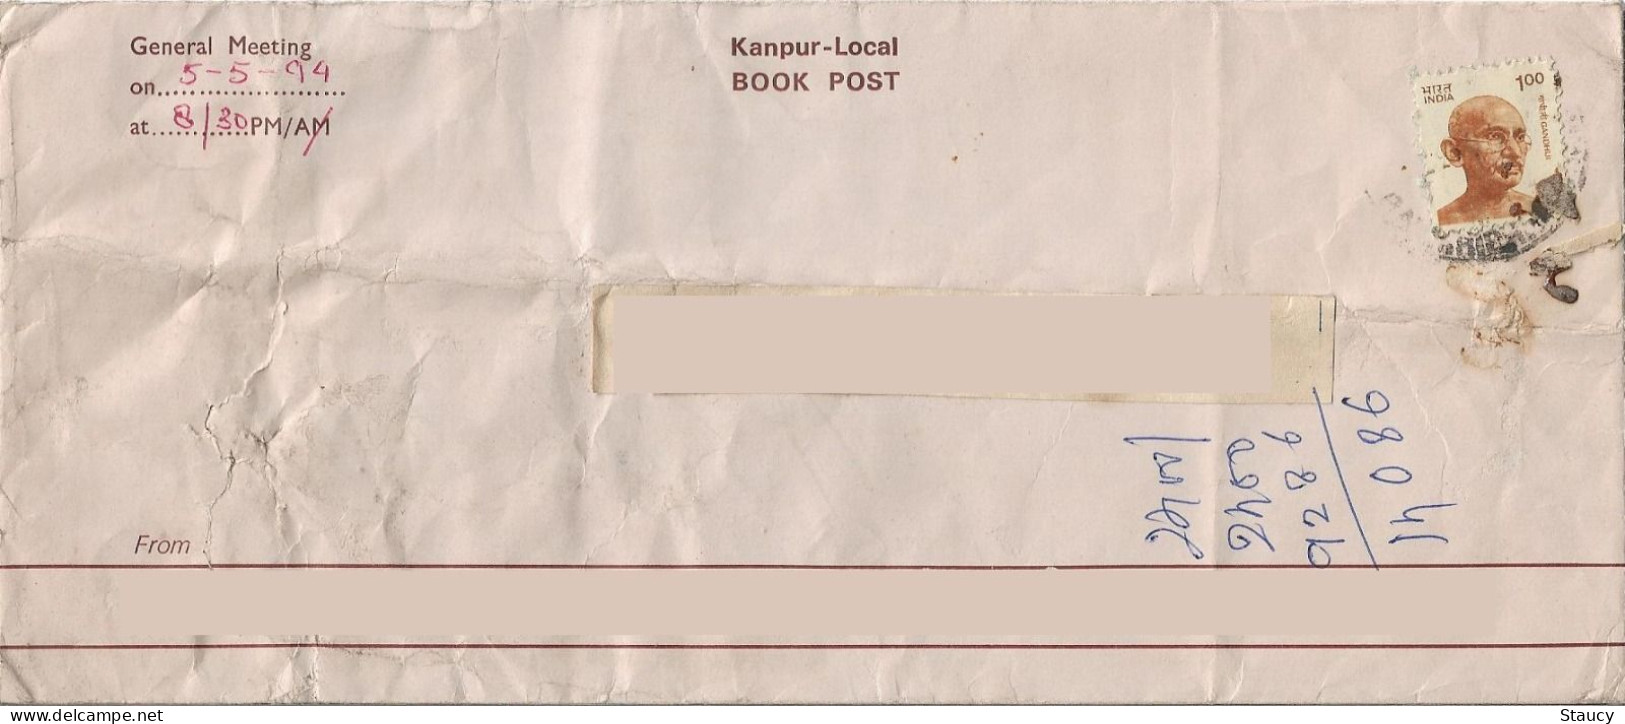 India 1994 MAHATMA GANDHI Rs.1.00 STAMP FRANKED ON COVER POSTAL Used As Per Scan - Covers & Documents